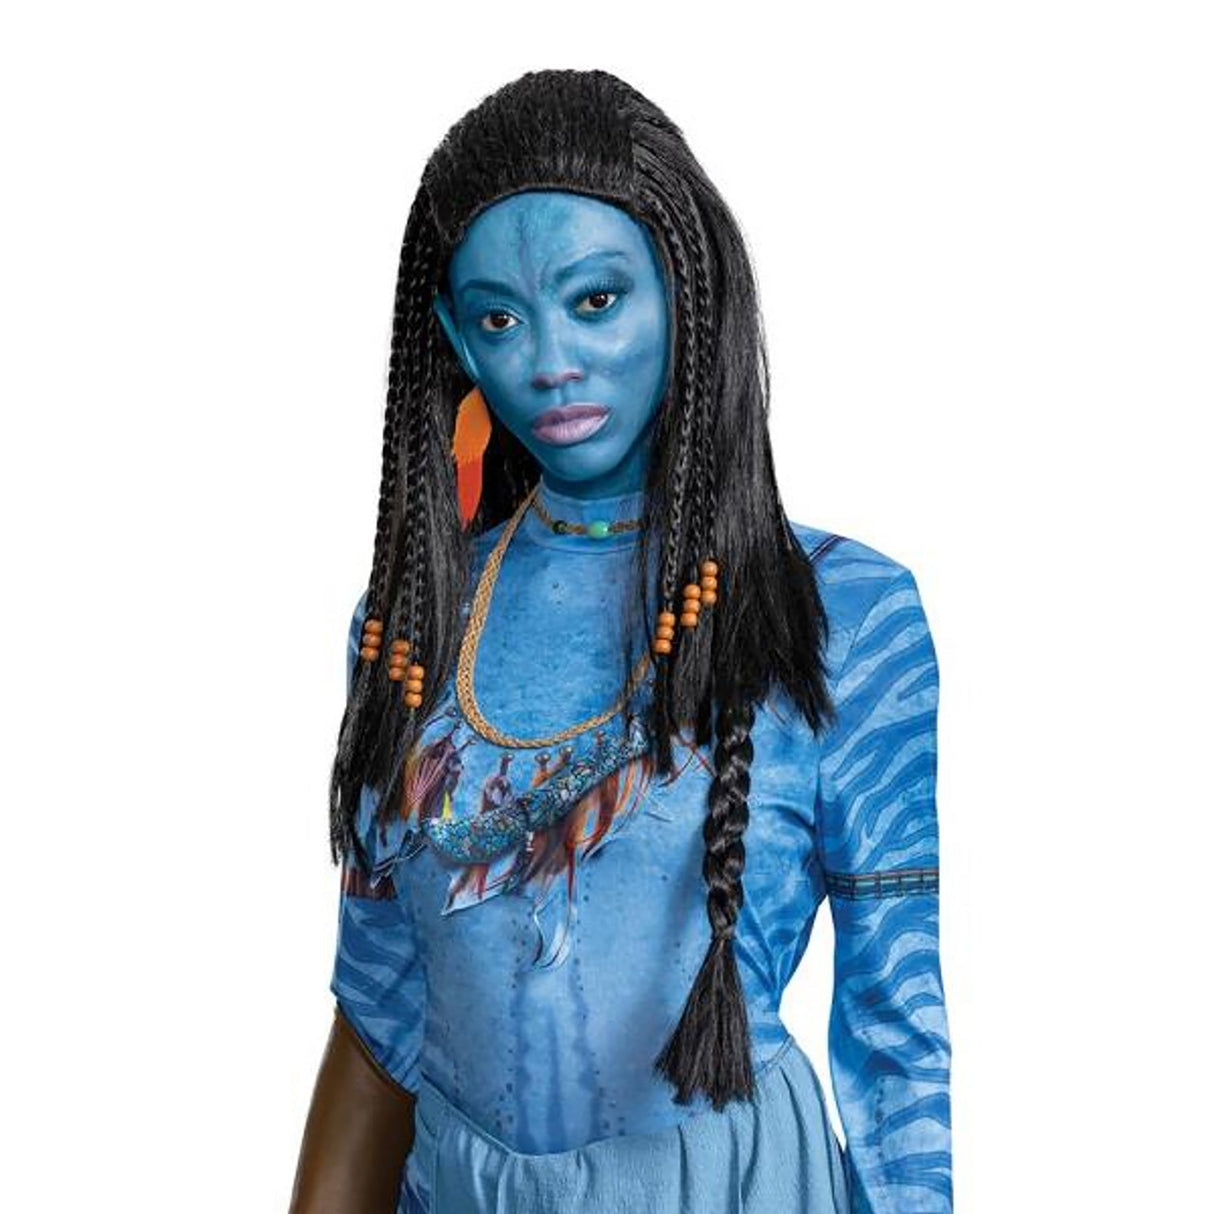 DISGUISE (TOY-SPORT) Costumes Avatar 2 Neytiri's Deluxe Wig